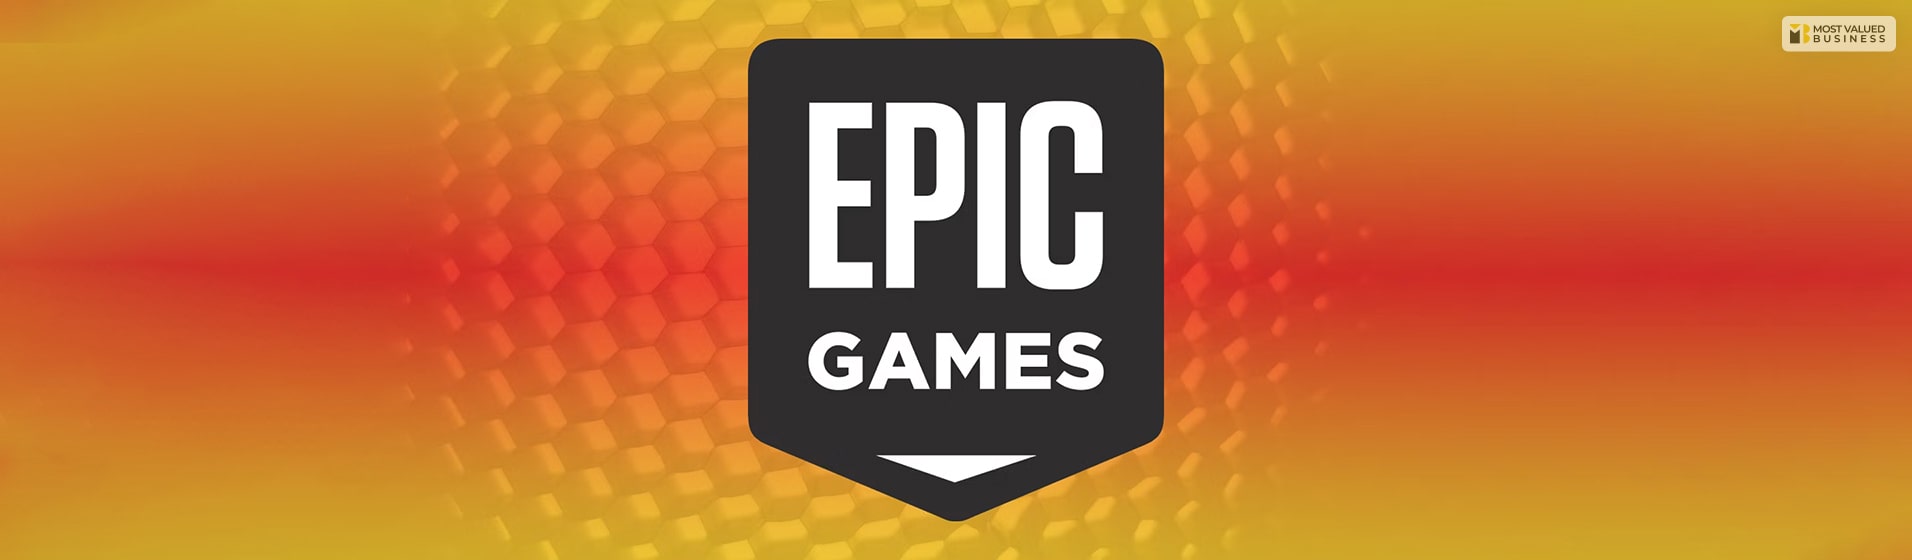 Everything-You-Need-To-Know-About-Epic-Games-Detailed-Overview-1